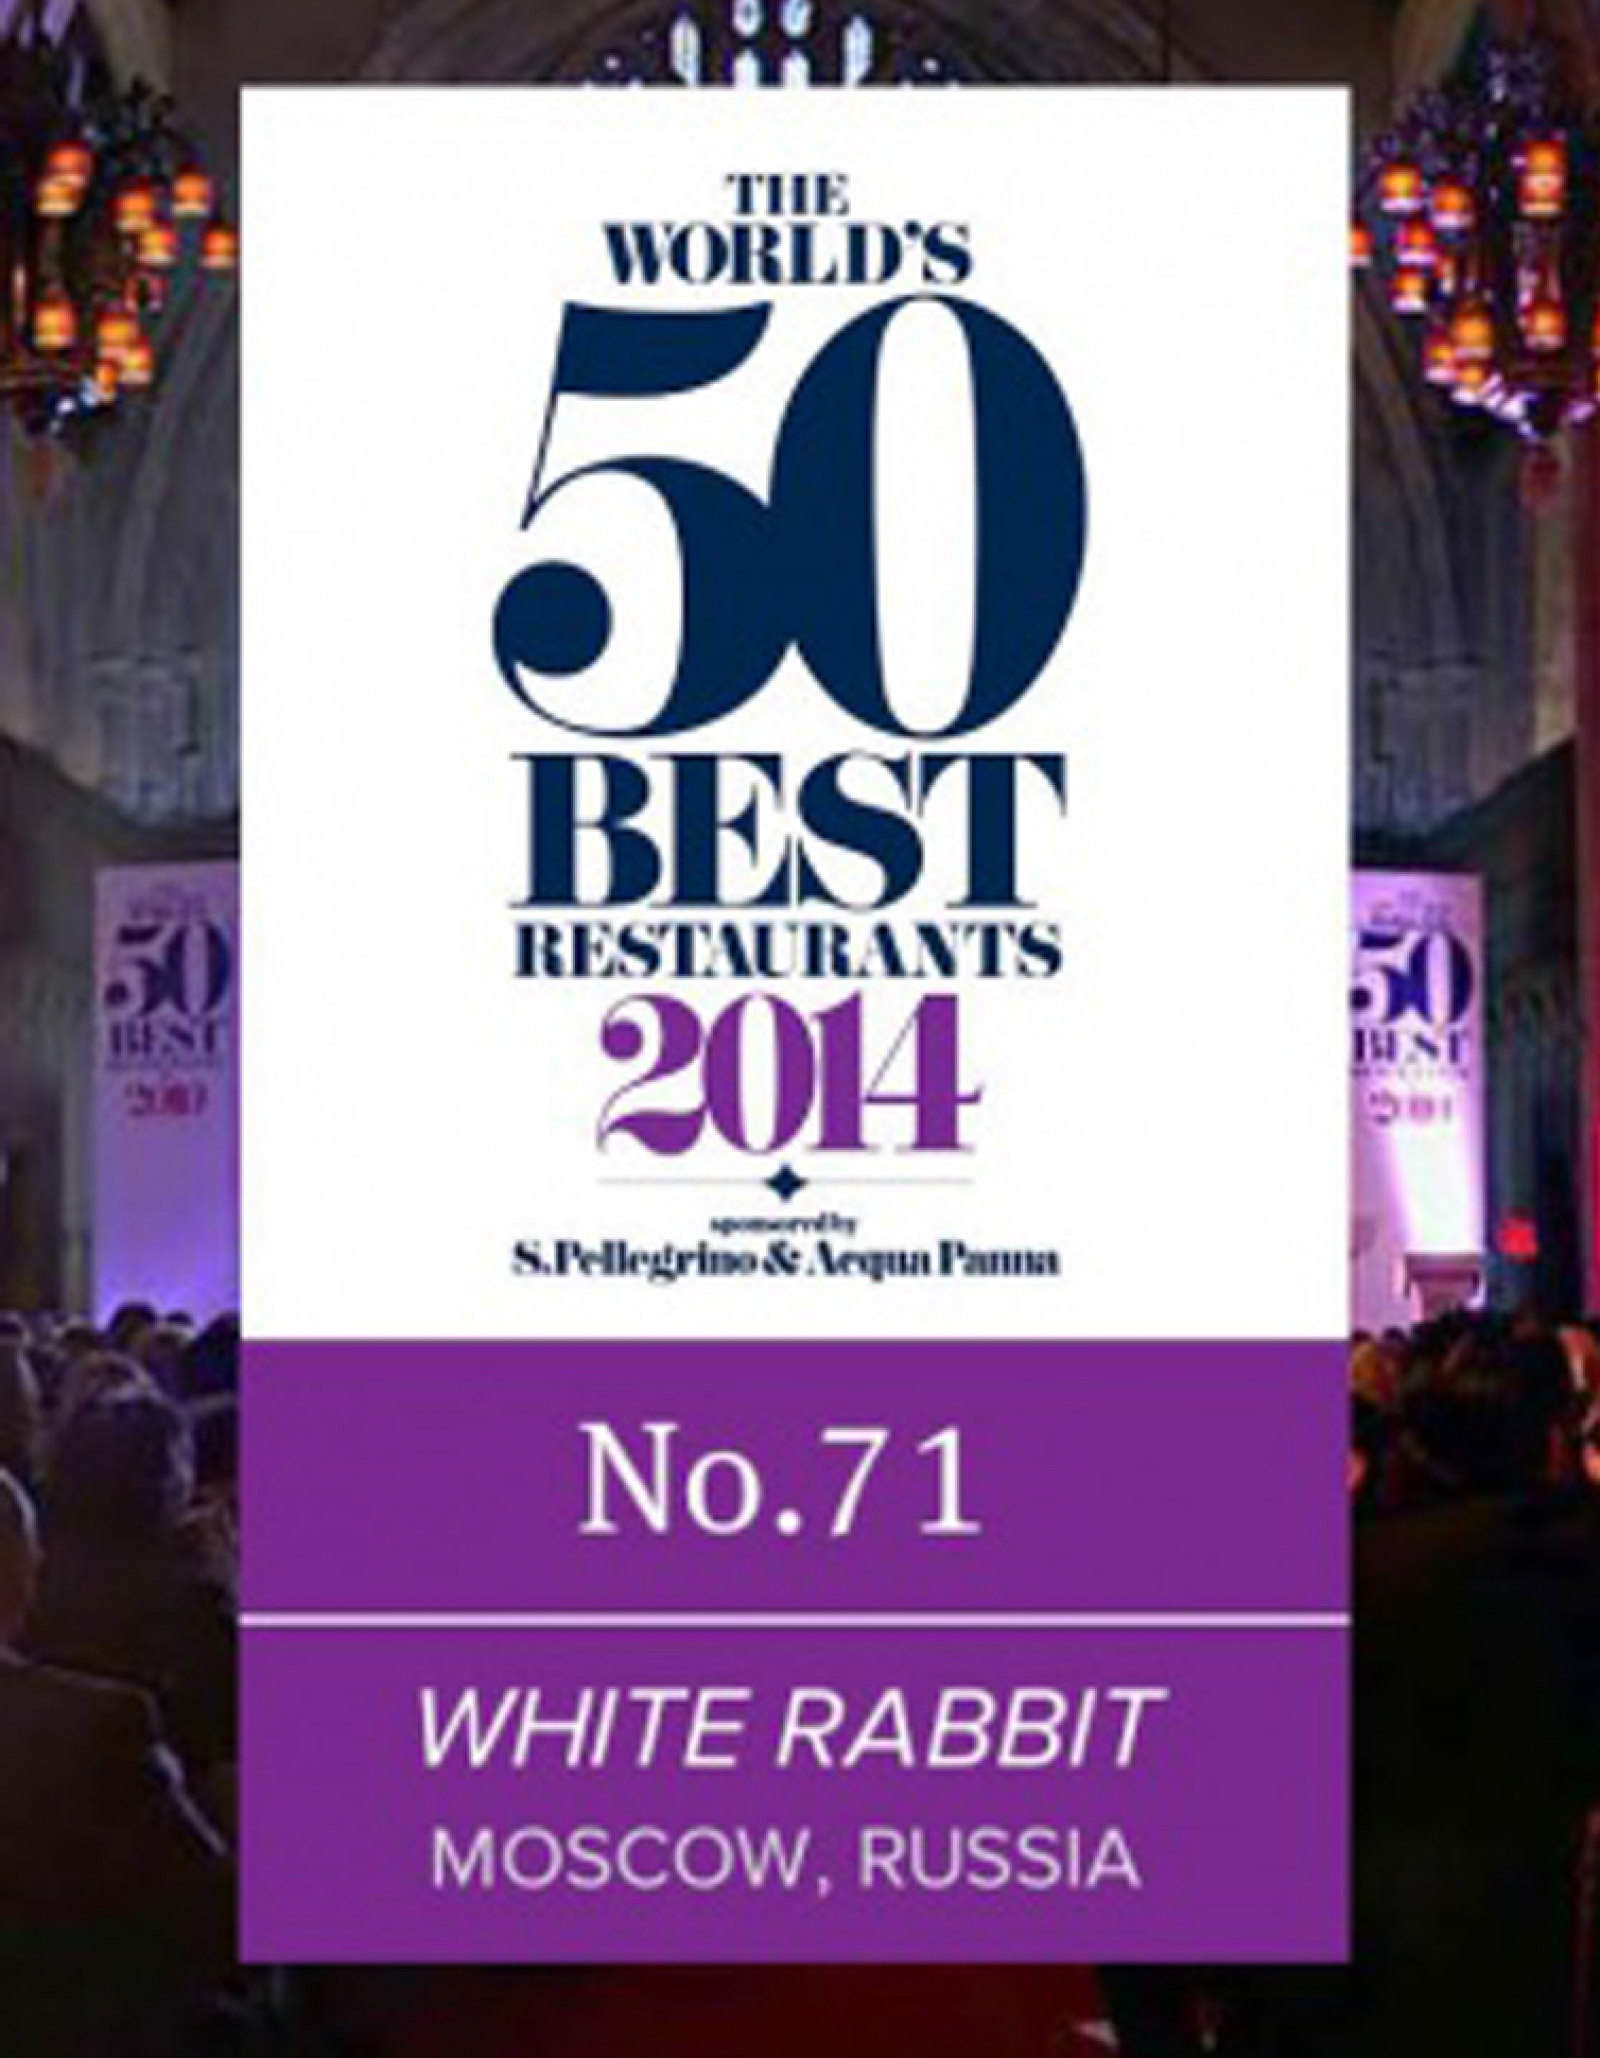 WHITE RABBIT MOSCOW AMONG THE 100 BEST RESTAURANTS OF THE WORLD